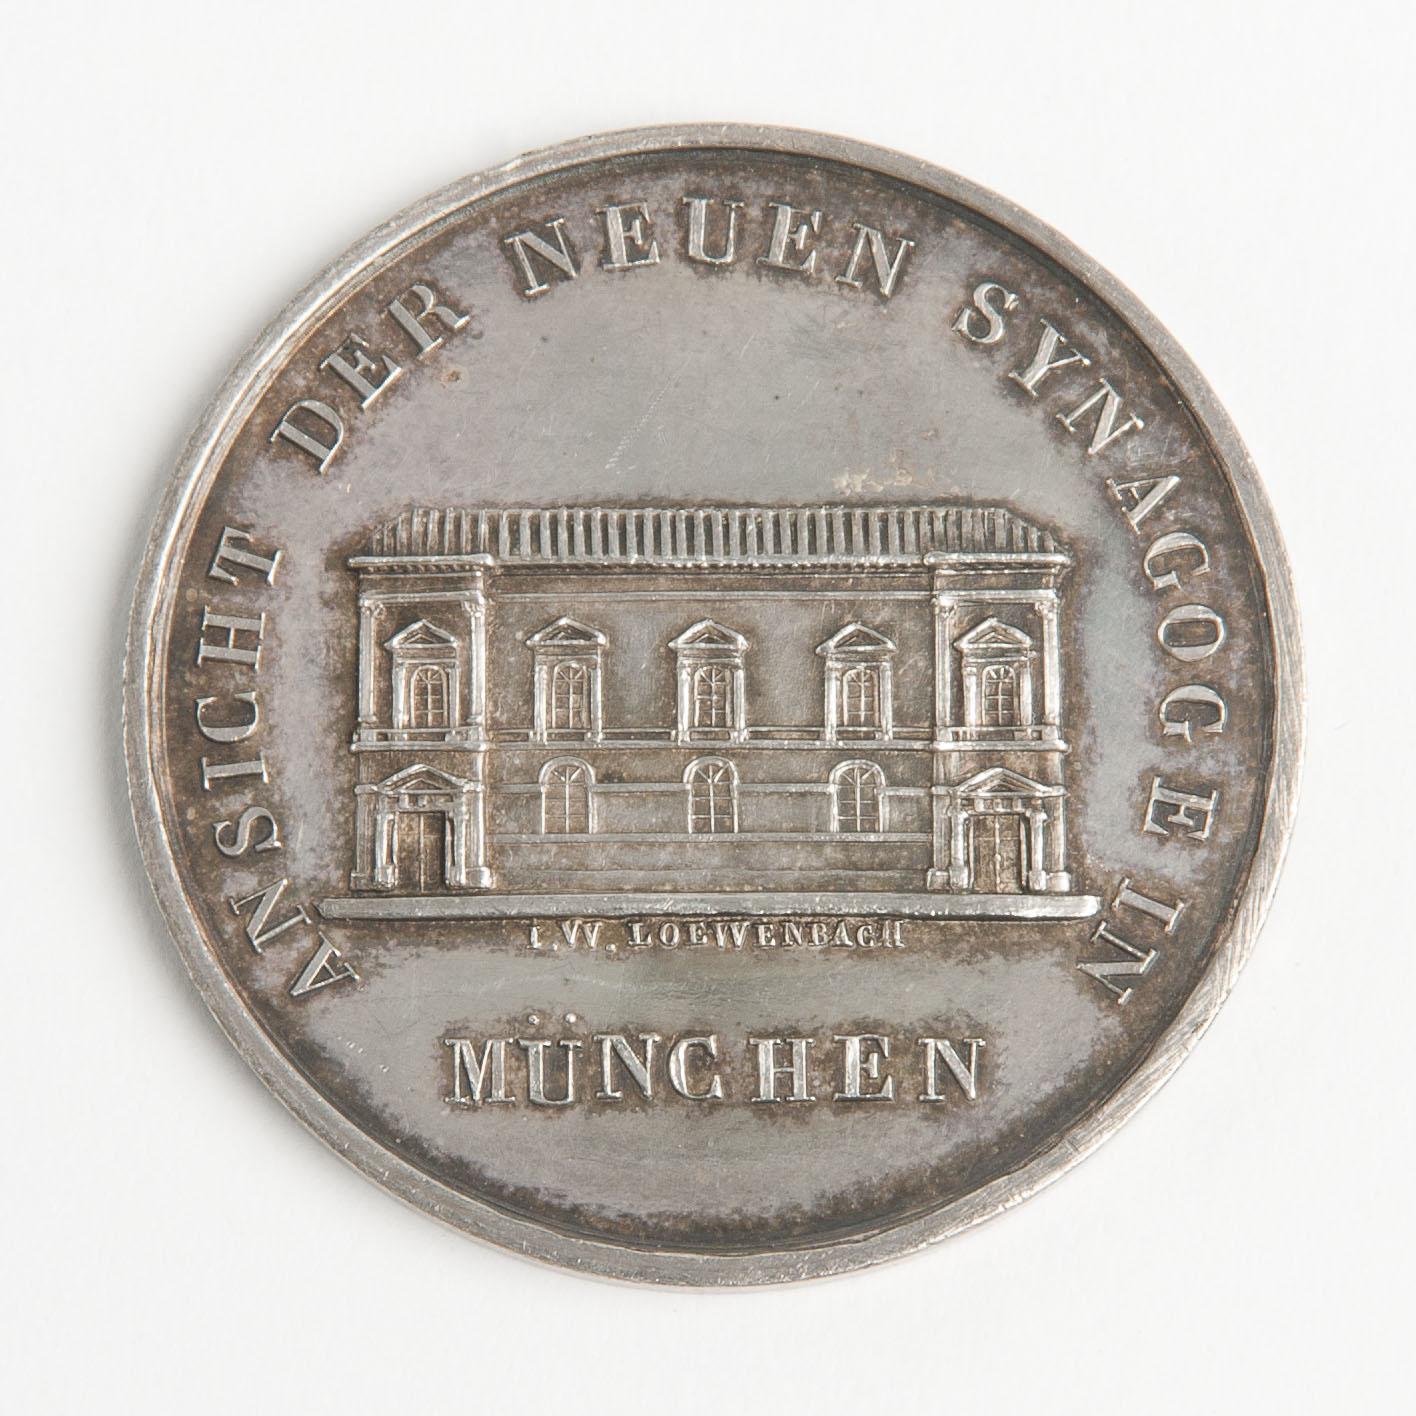 Silver medal featuring synagogue and German text.